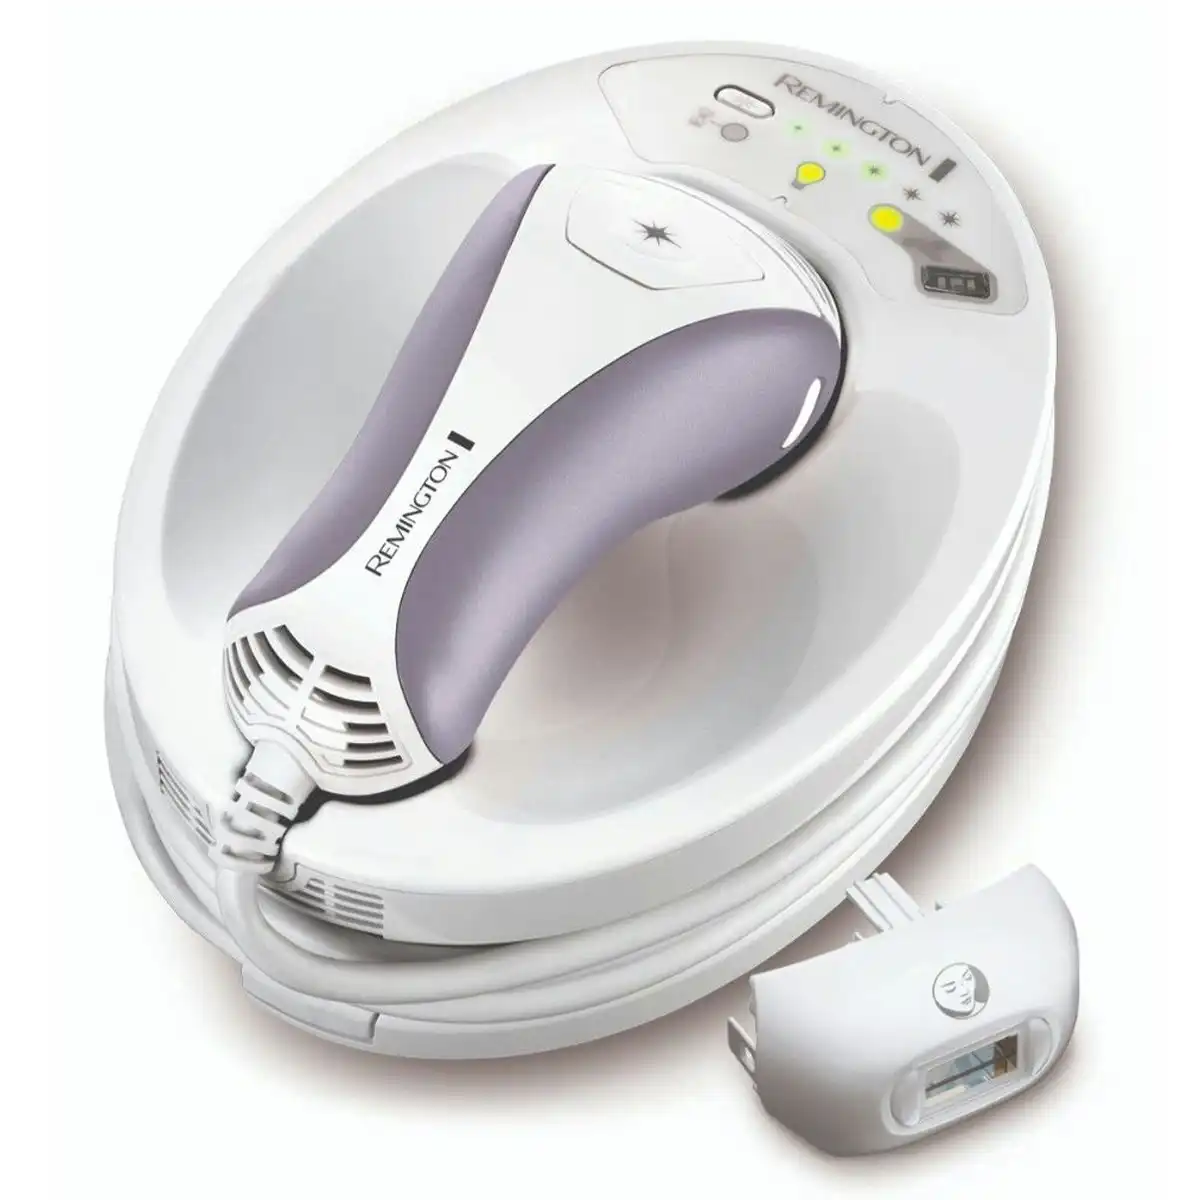 Remington iLIGHT Pro + Face and Body IPL Hair Removal